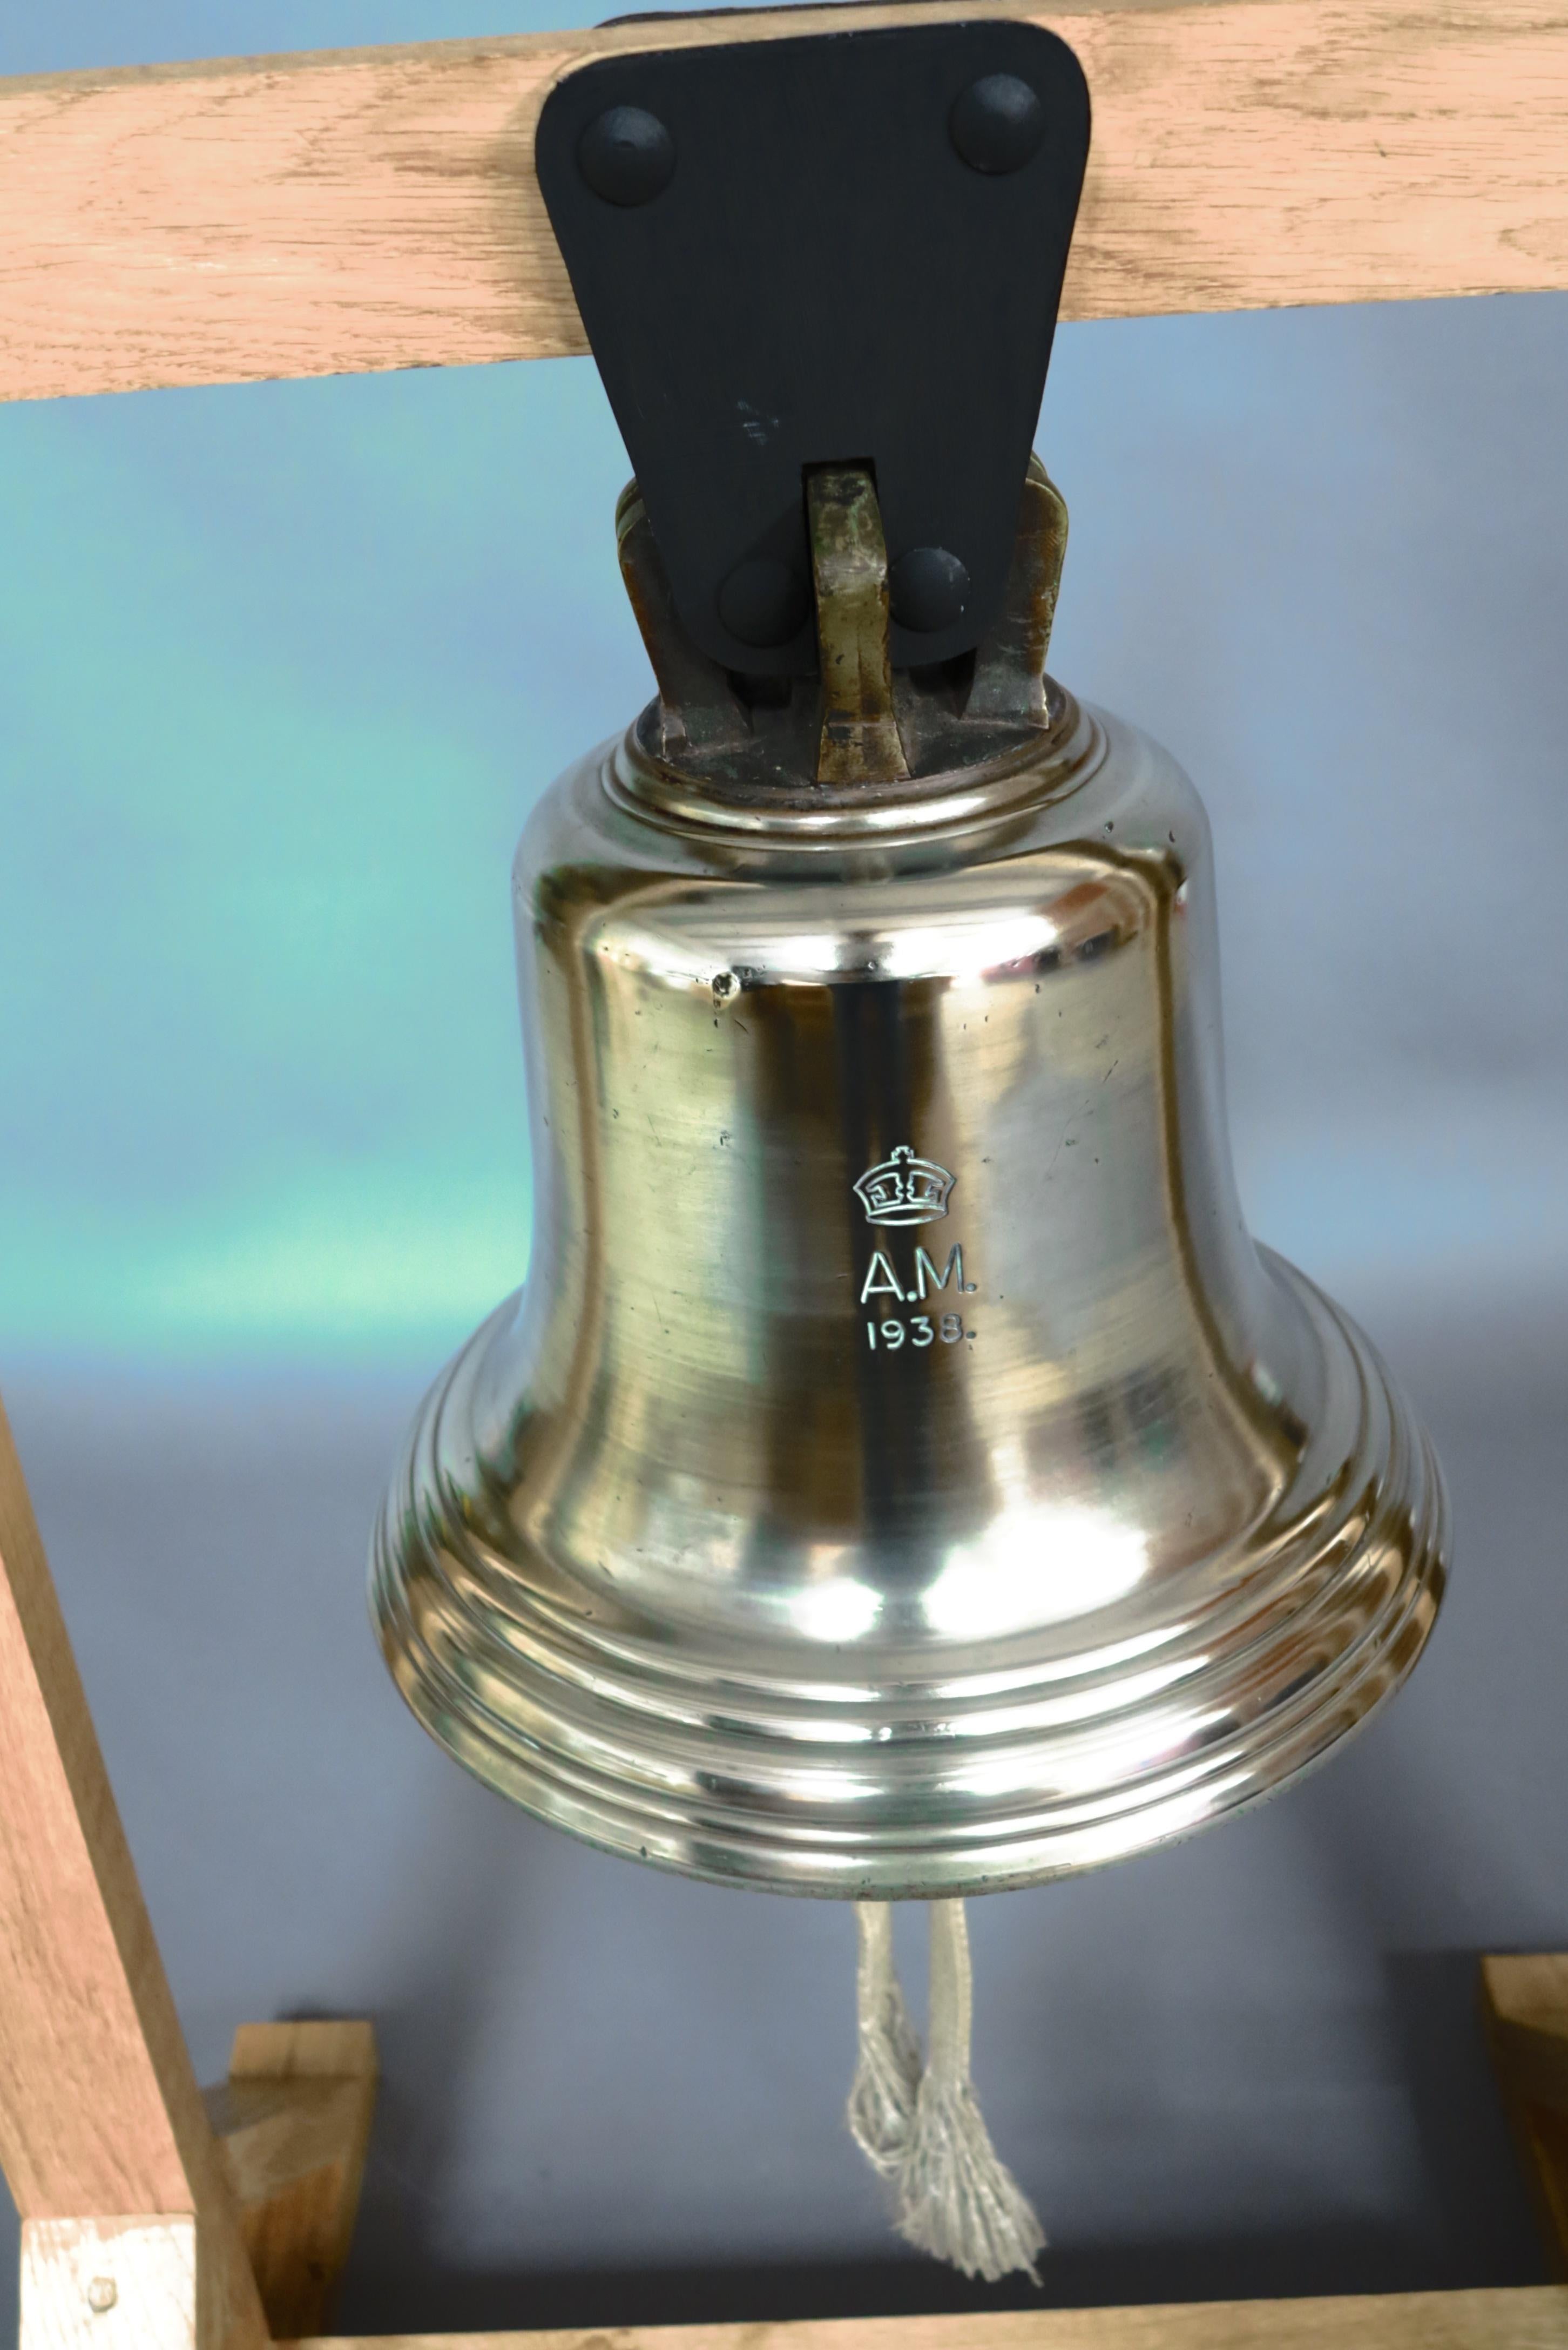 A majestic Royal Air Force station large bronze ‘scramble’ bell, in service at the start of World War II, mounted from on a custom oak frame, retaining its original clanger. The casing marked with engraved AM (Air Ministry) crest and crown above,